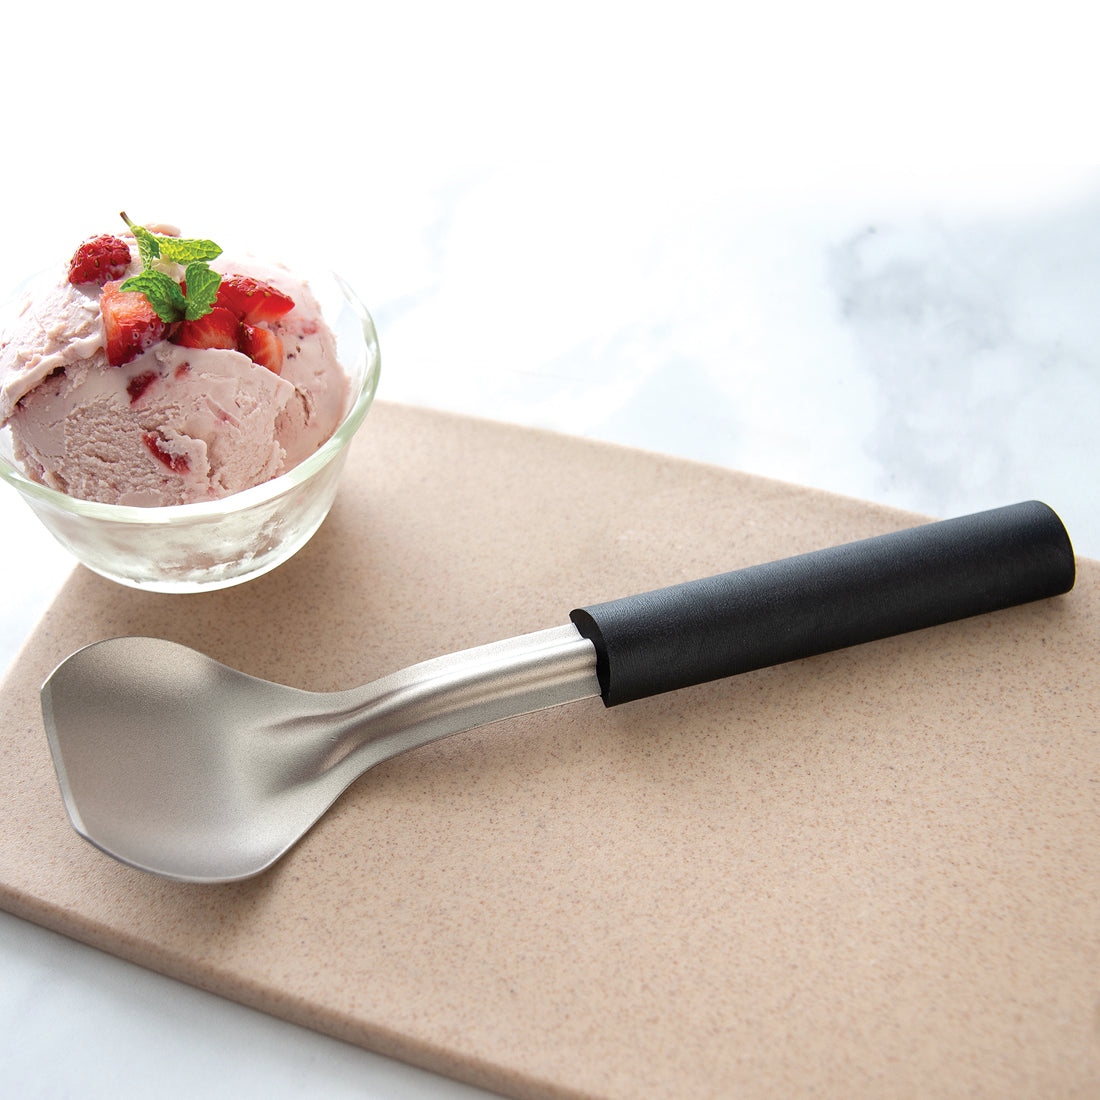 A fresh dipped serving of strawberry ice cream in a glass bowl garnished with fresh mint alongside the Rada Ice Cream Scoop.